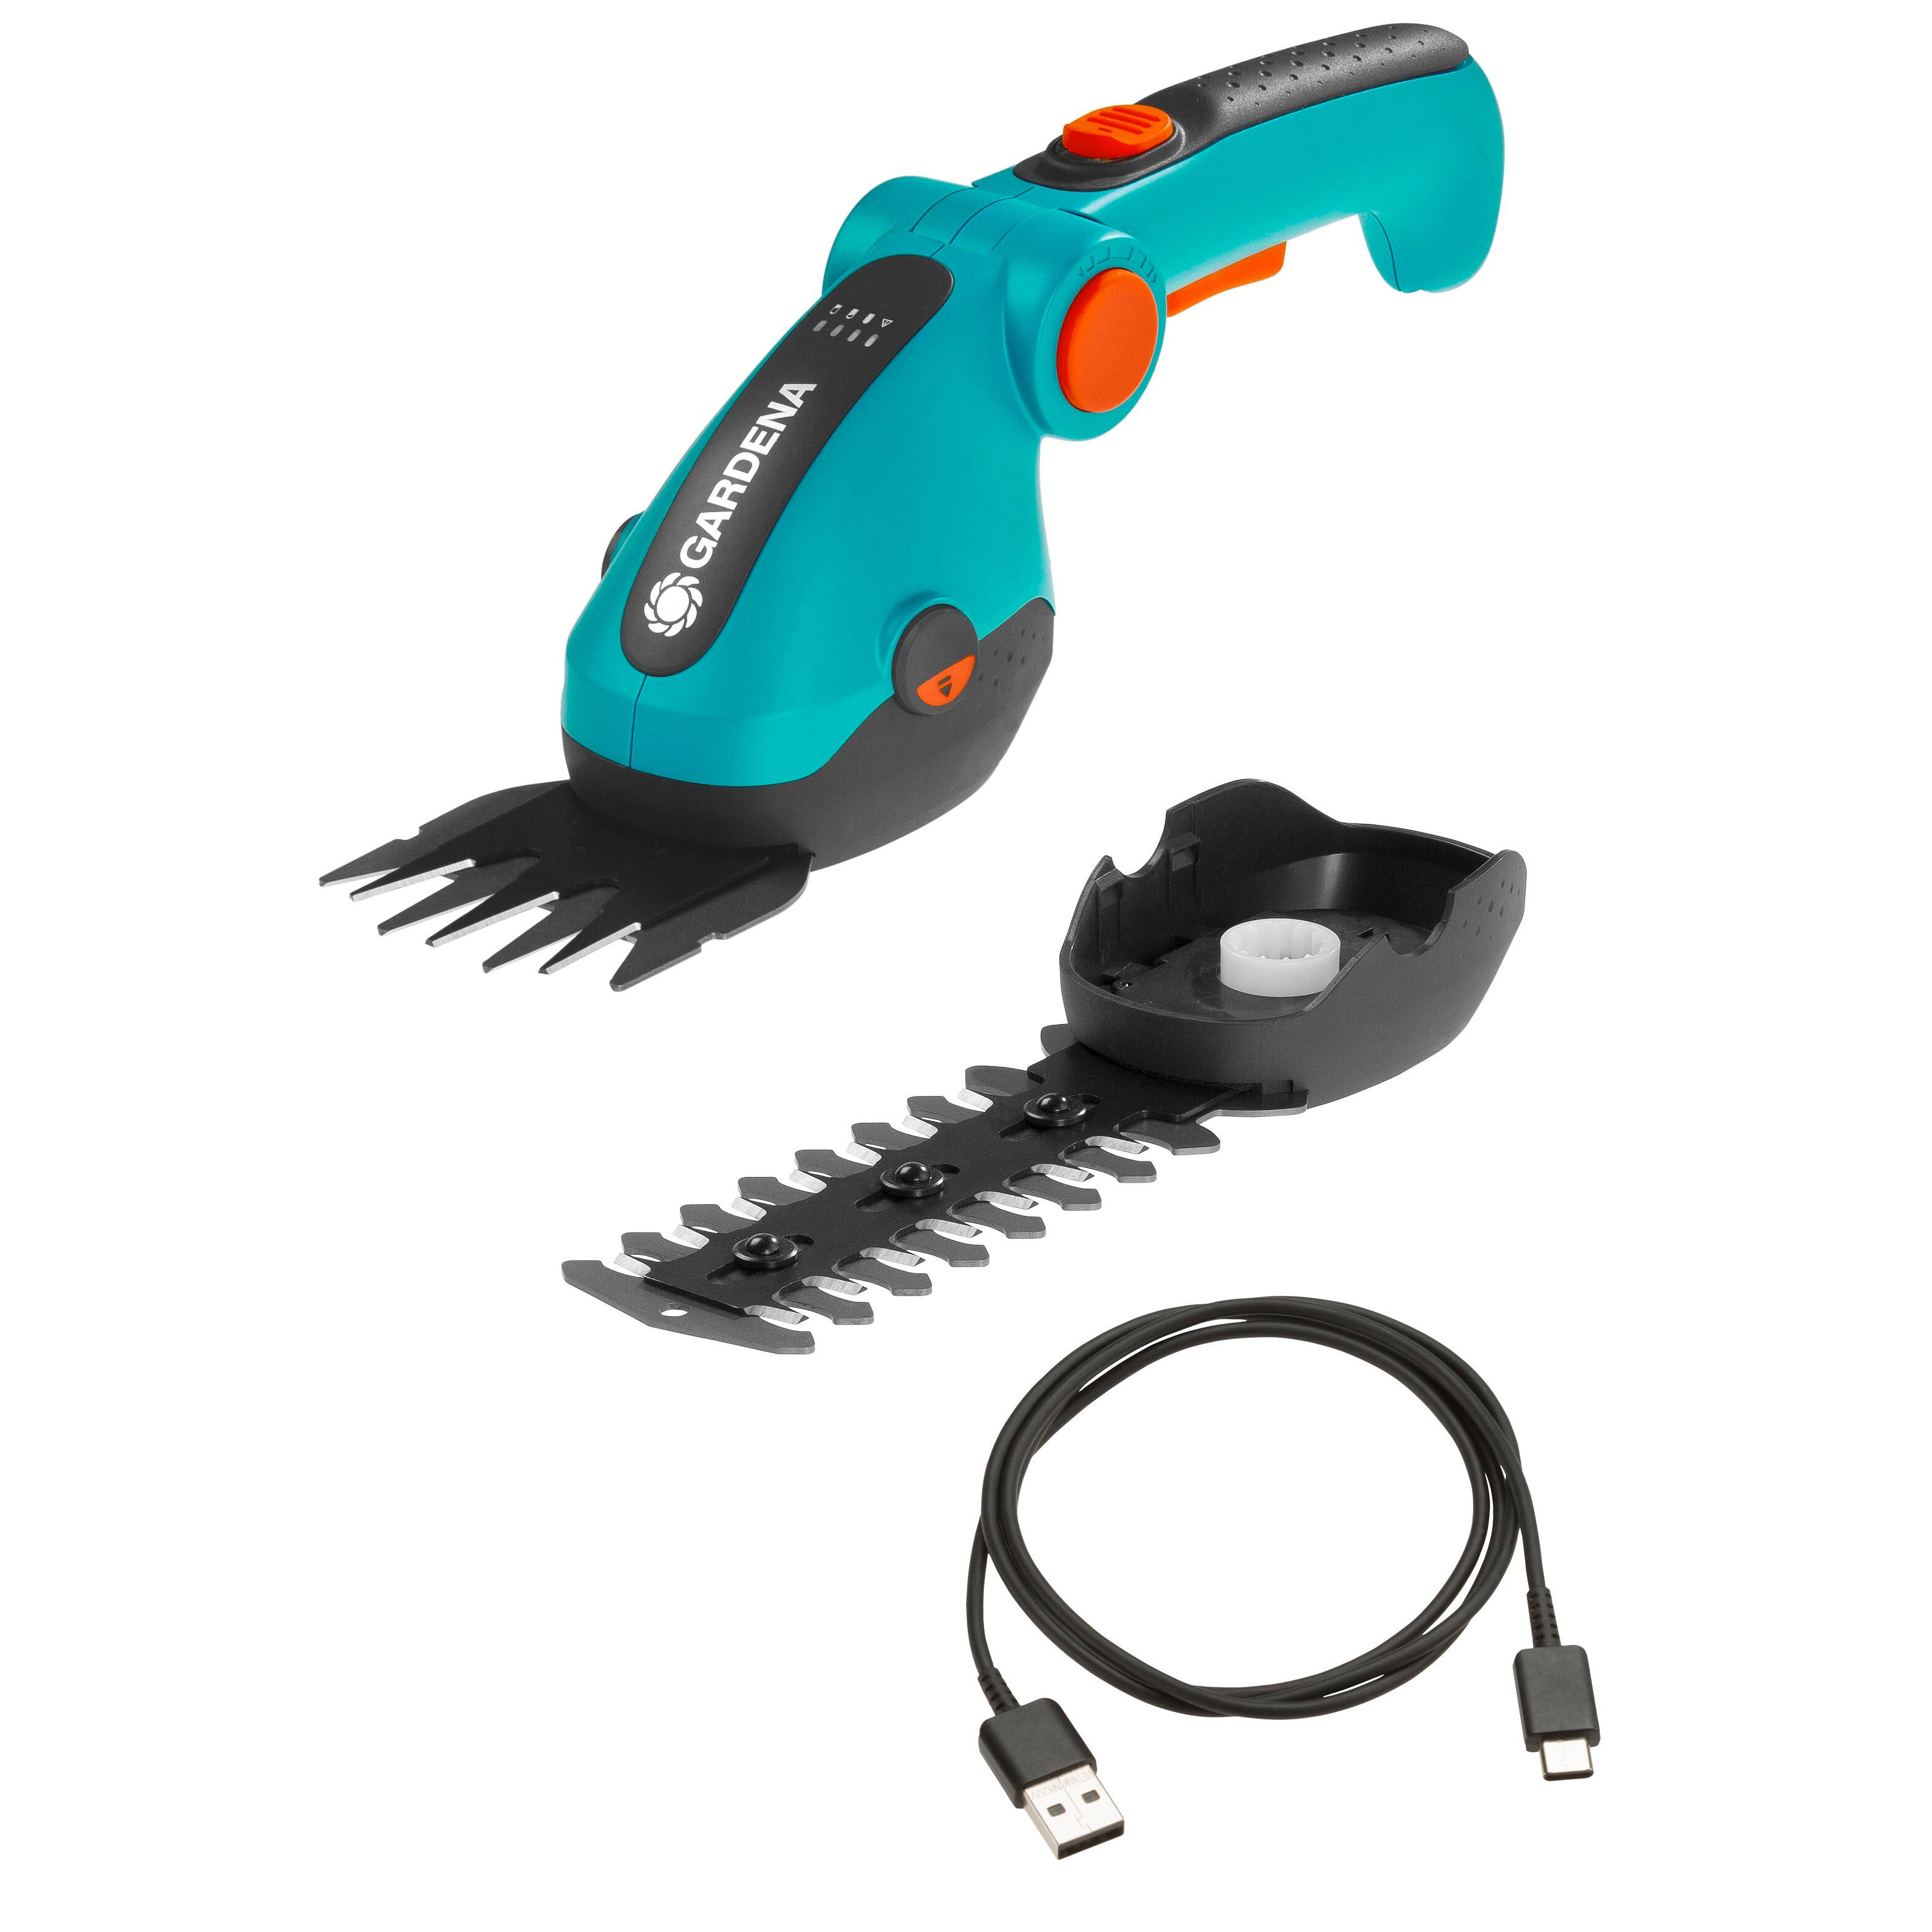 GARDENA 9858-20 Battery Grass Shears with Extension Handle and Wheels Set,  Cordless, Handheld Shears, 80 Min Run time, Replaceable Quality Non Stick